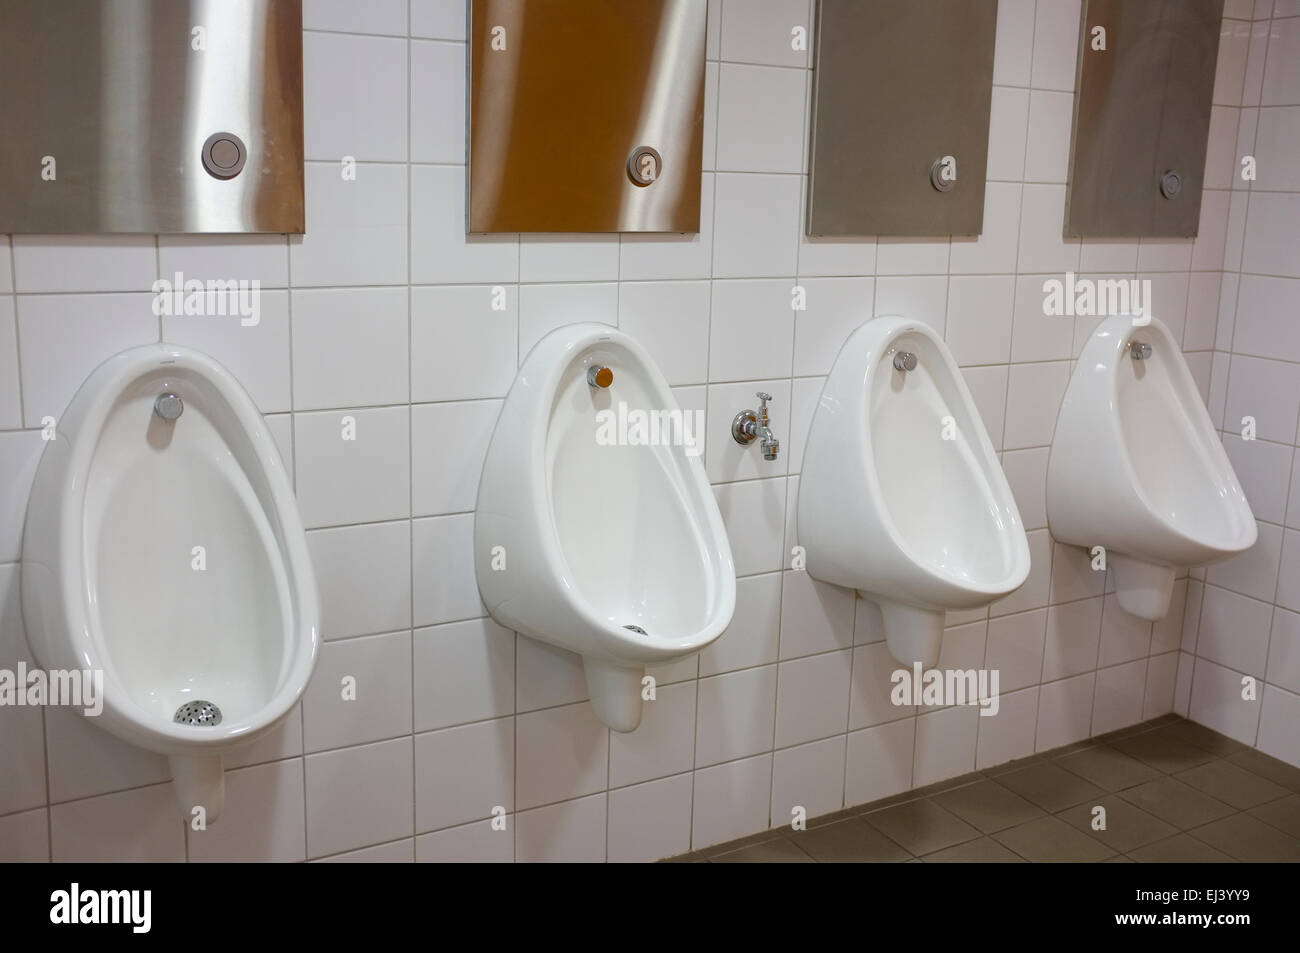 Line of urinals in the mens toilet. Stock Photo